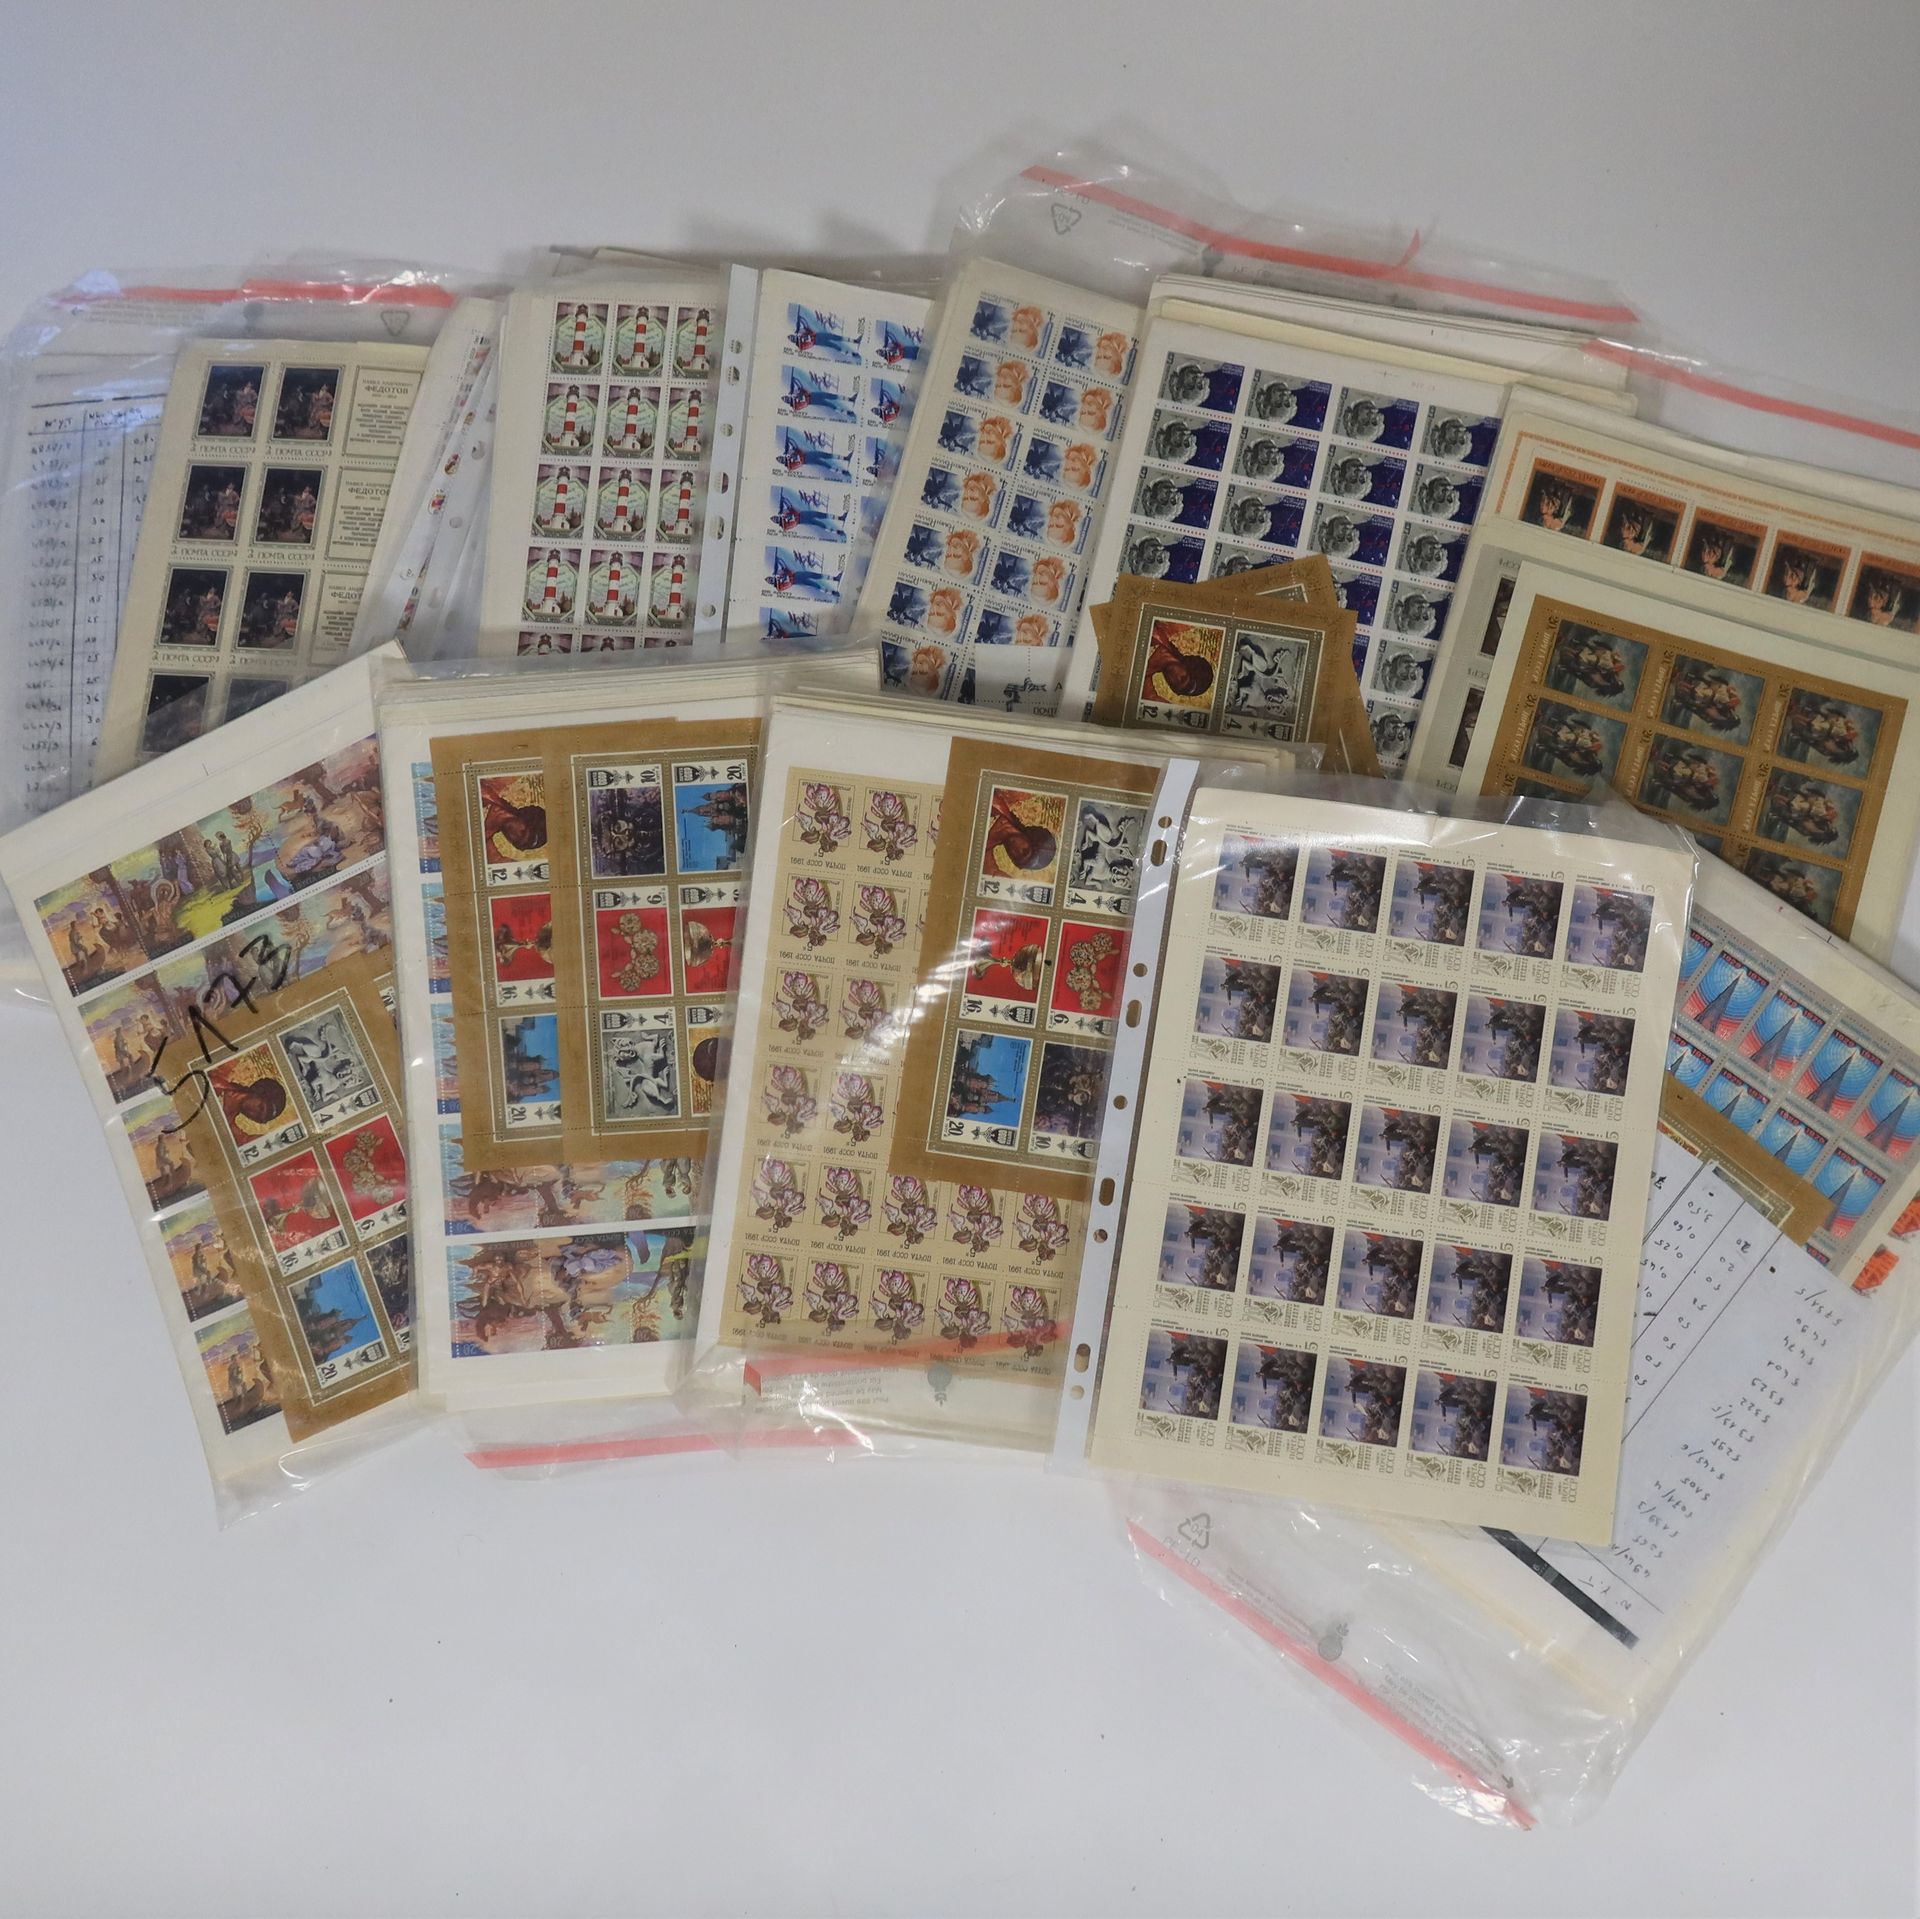 Null [USSR]
In two bags, several tens of thousands of stamps of the last 30 year&hellip;